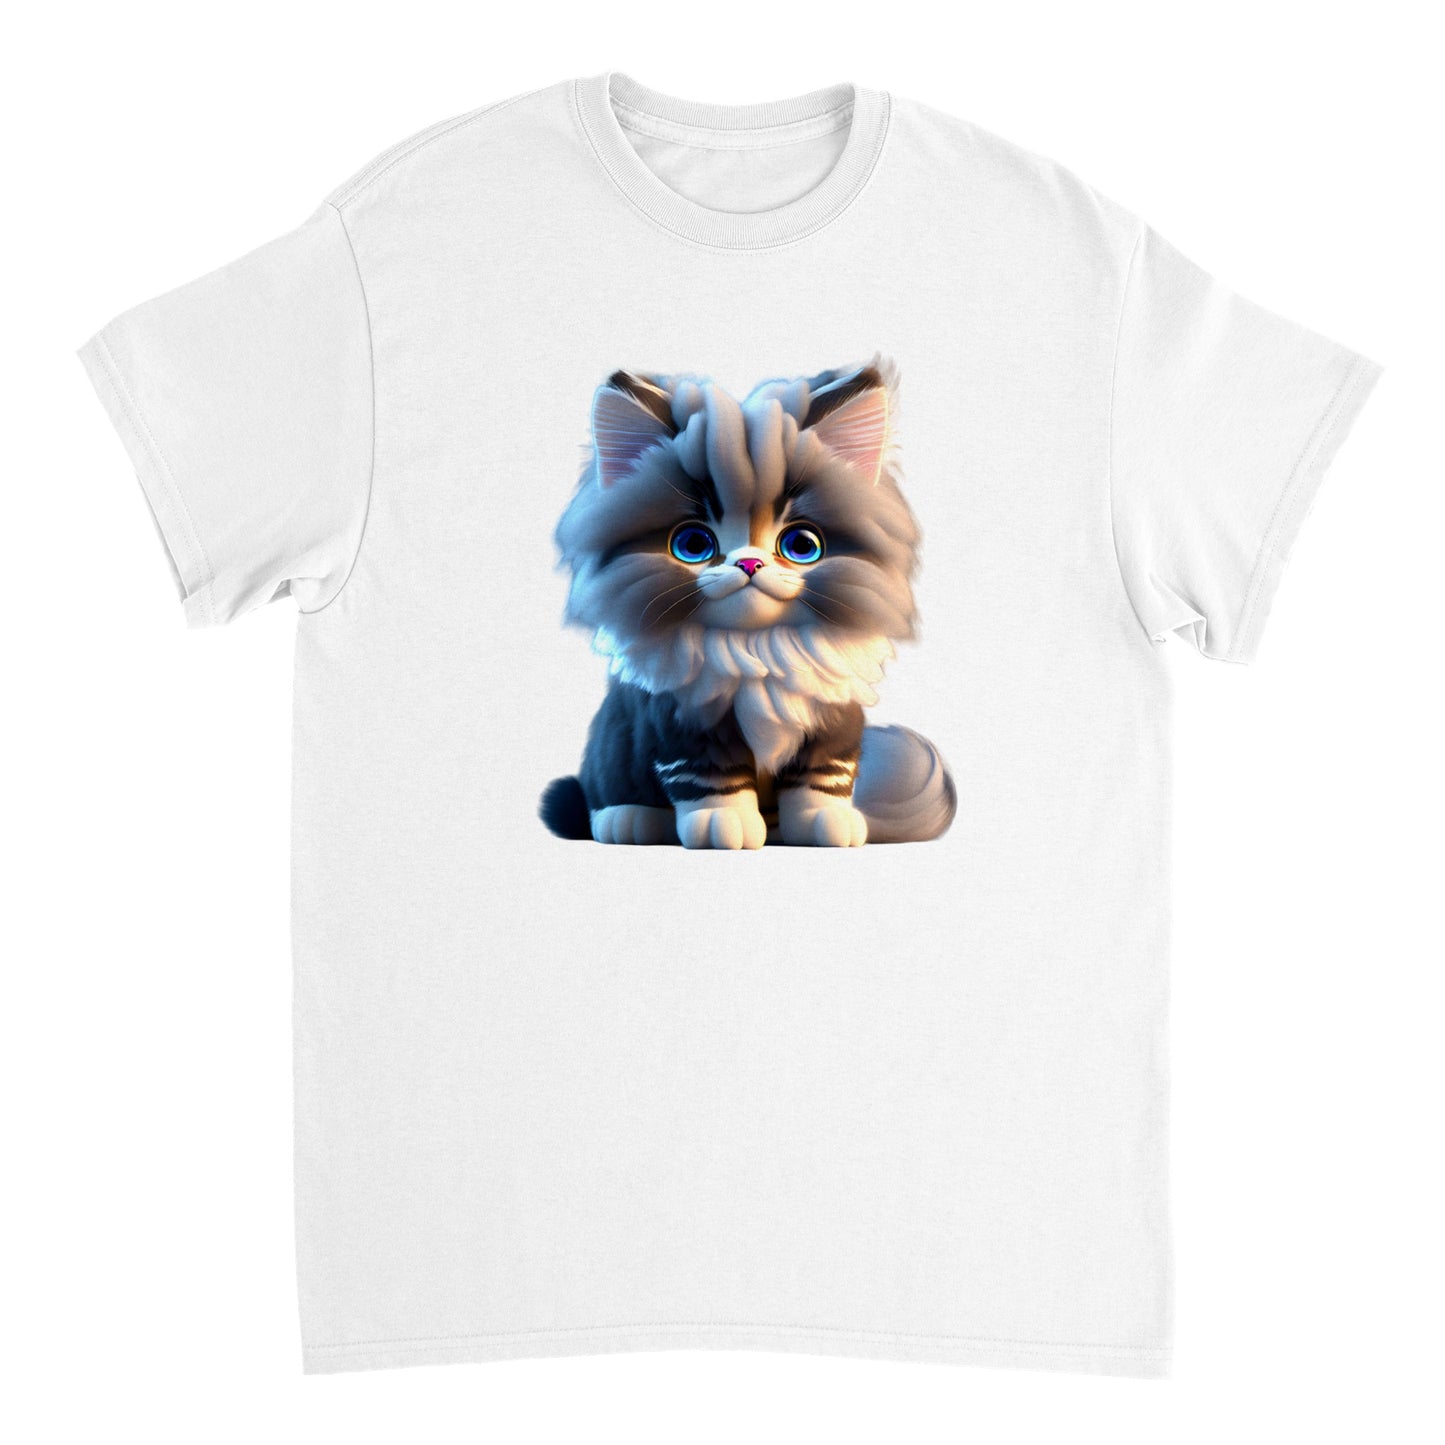 Adorable, Cool, Cute Cats and Kittens Toy - Heavyweight Unisex Crewneck T-shirt 4